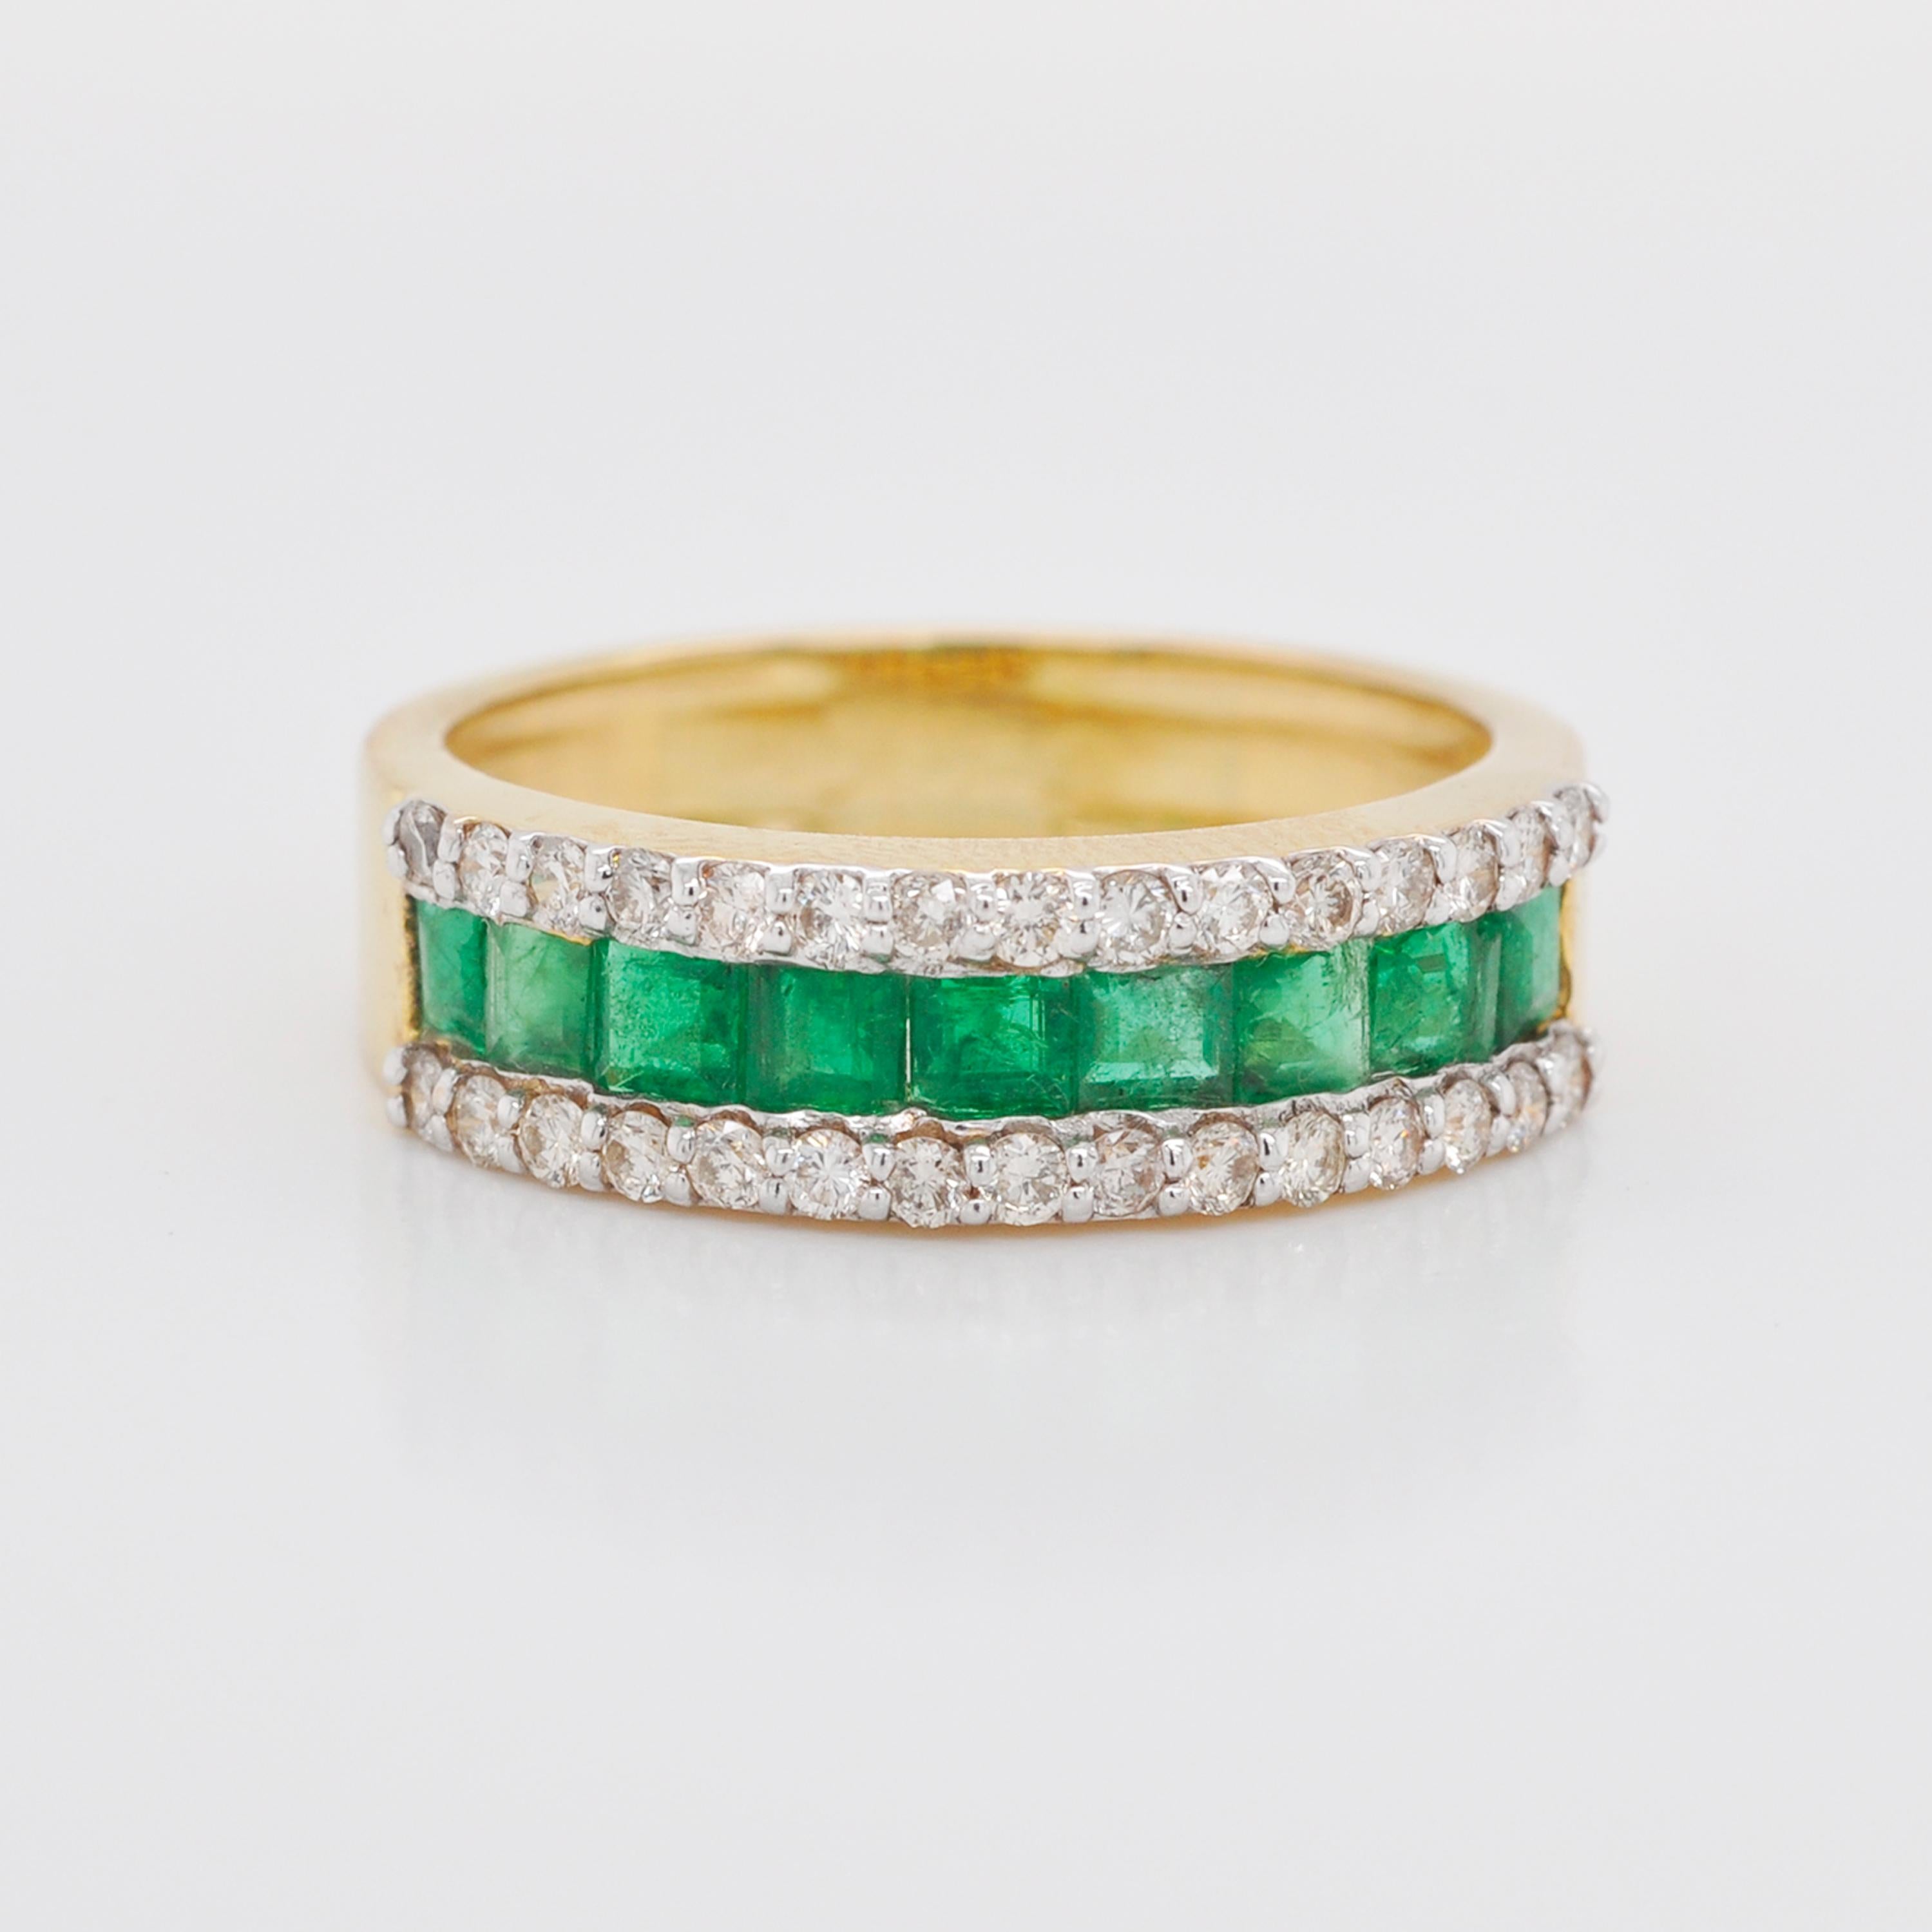 emerald cut center stone with gradient emeralds in a channel set band